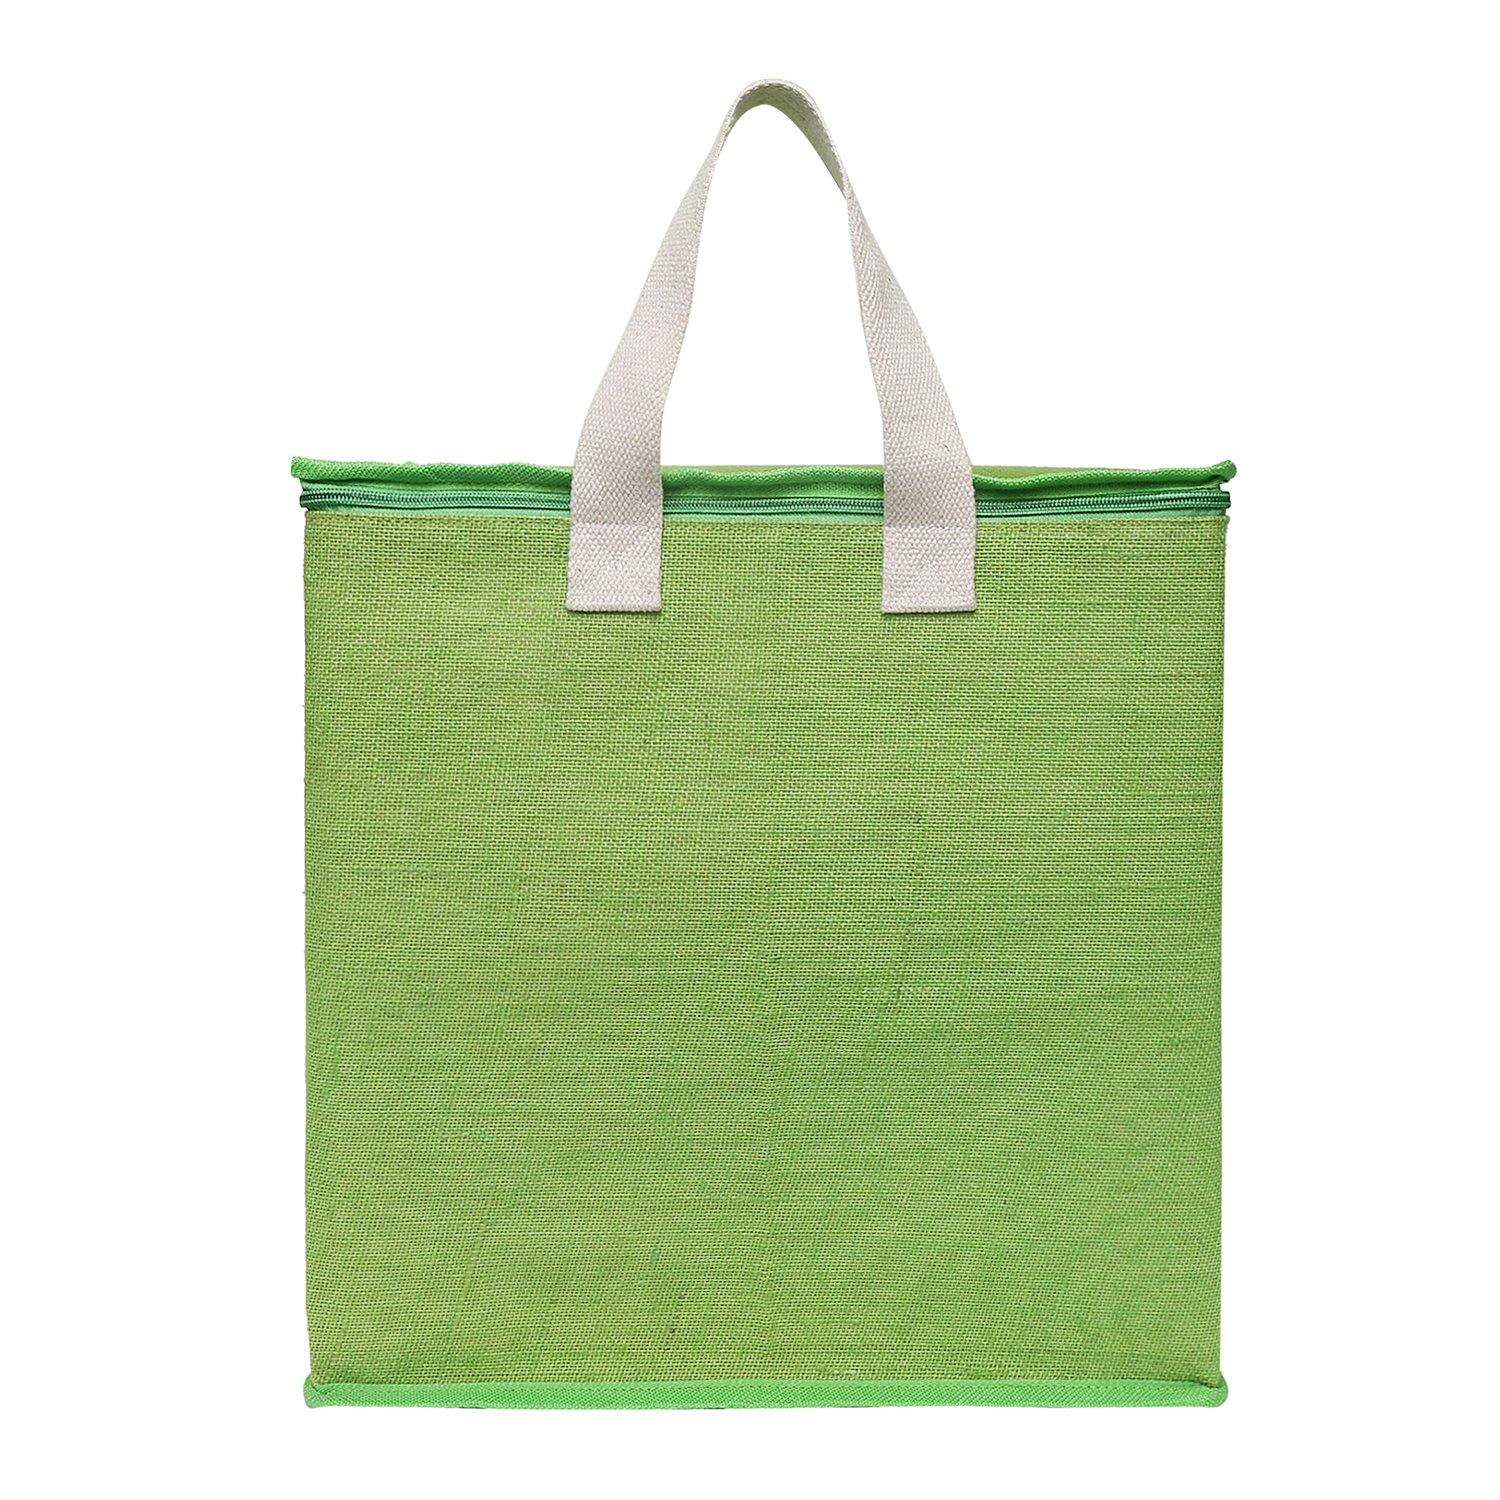 DOUBLE R BAGS Jute Shopping bags with Dual Zippers (Green) - Double R Bags